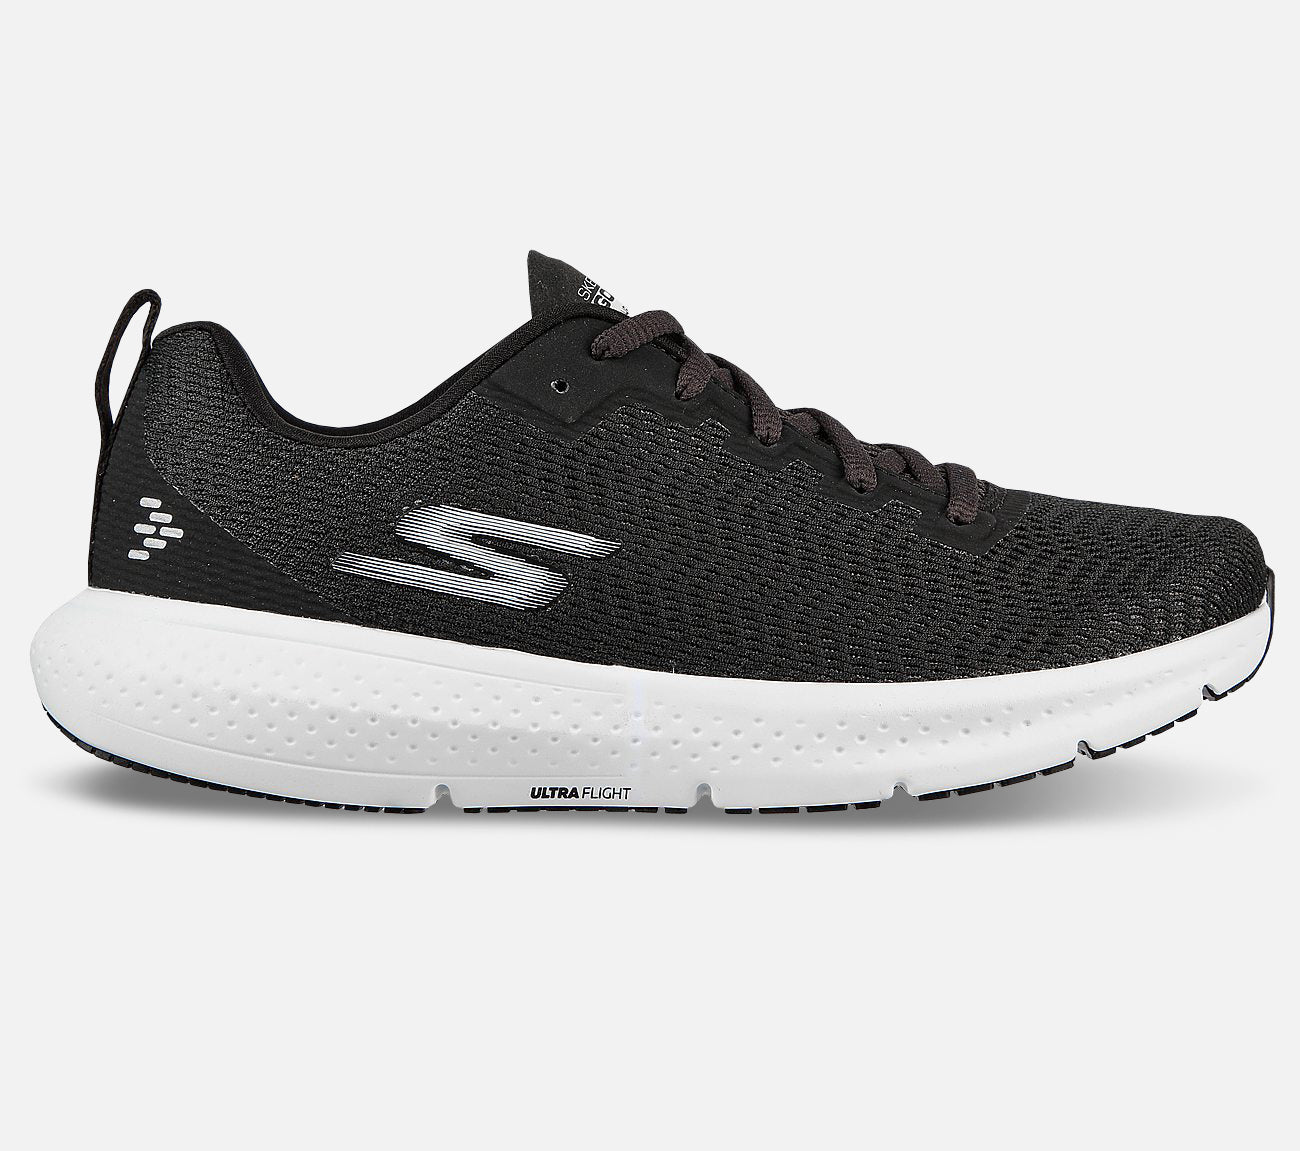 GO RUN Supersonic - Relaxed Fit Shoe Skechers